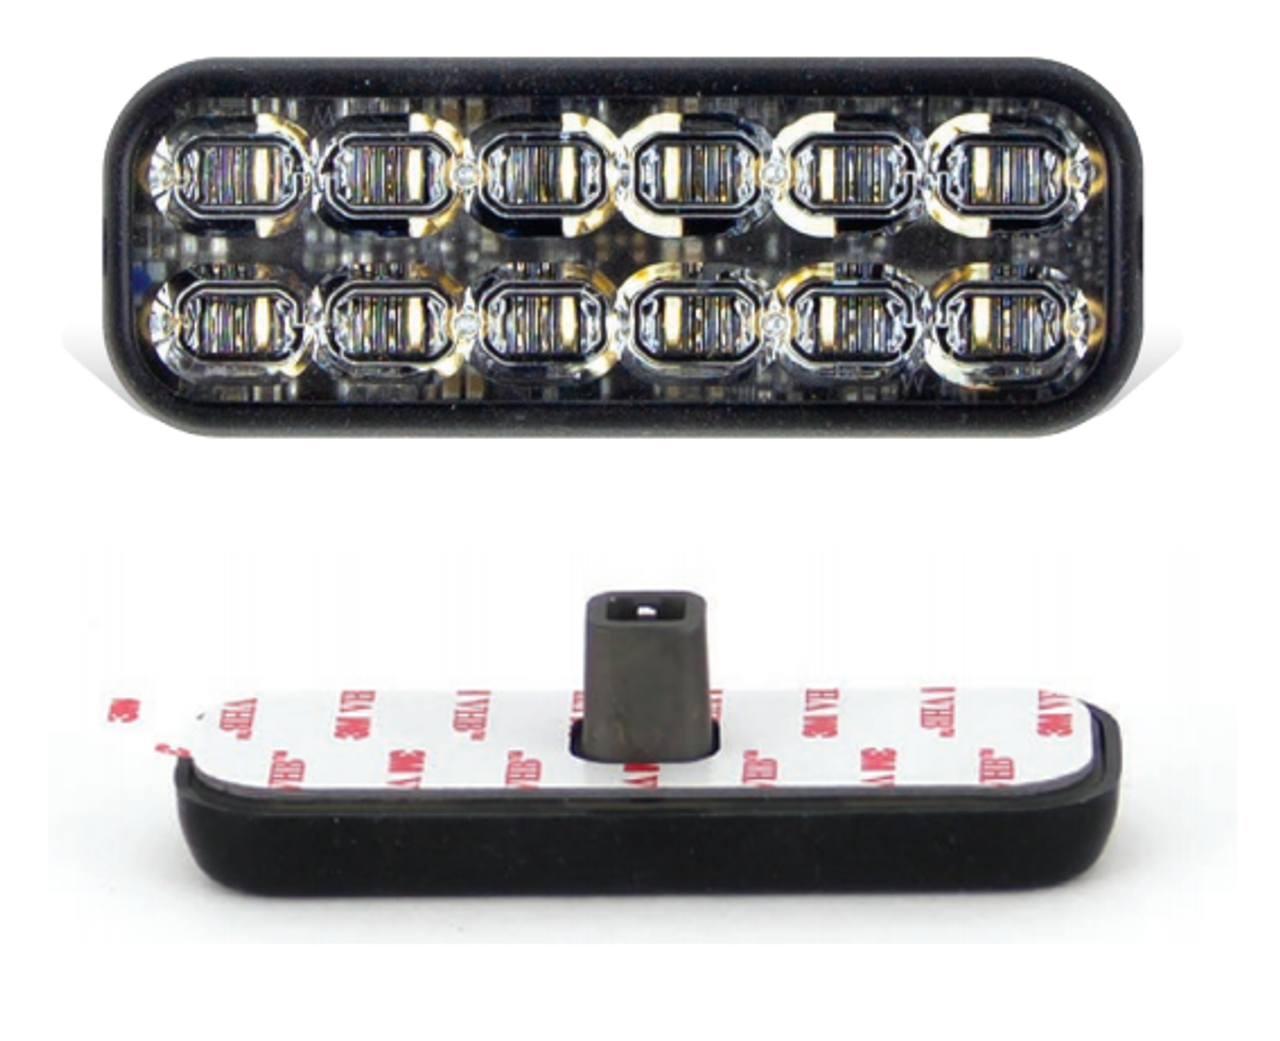 SoundOff Signal mPOWER Fascia 4 x 2 inch LED Light Head EMPSA05, Double,  Stacked, 36-LED (3 colors) per head, RED/AMBER/WHITE, Silicone housing,  Quick 